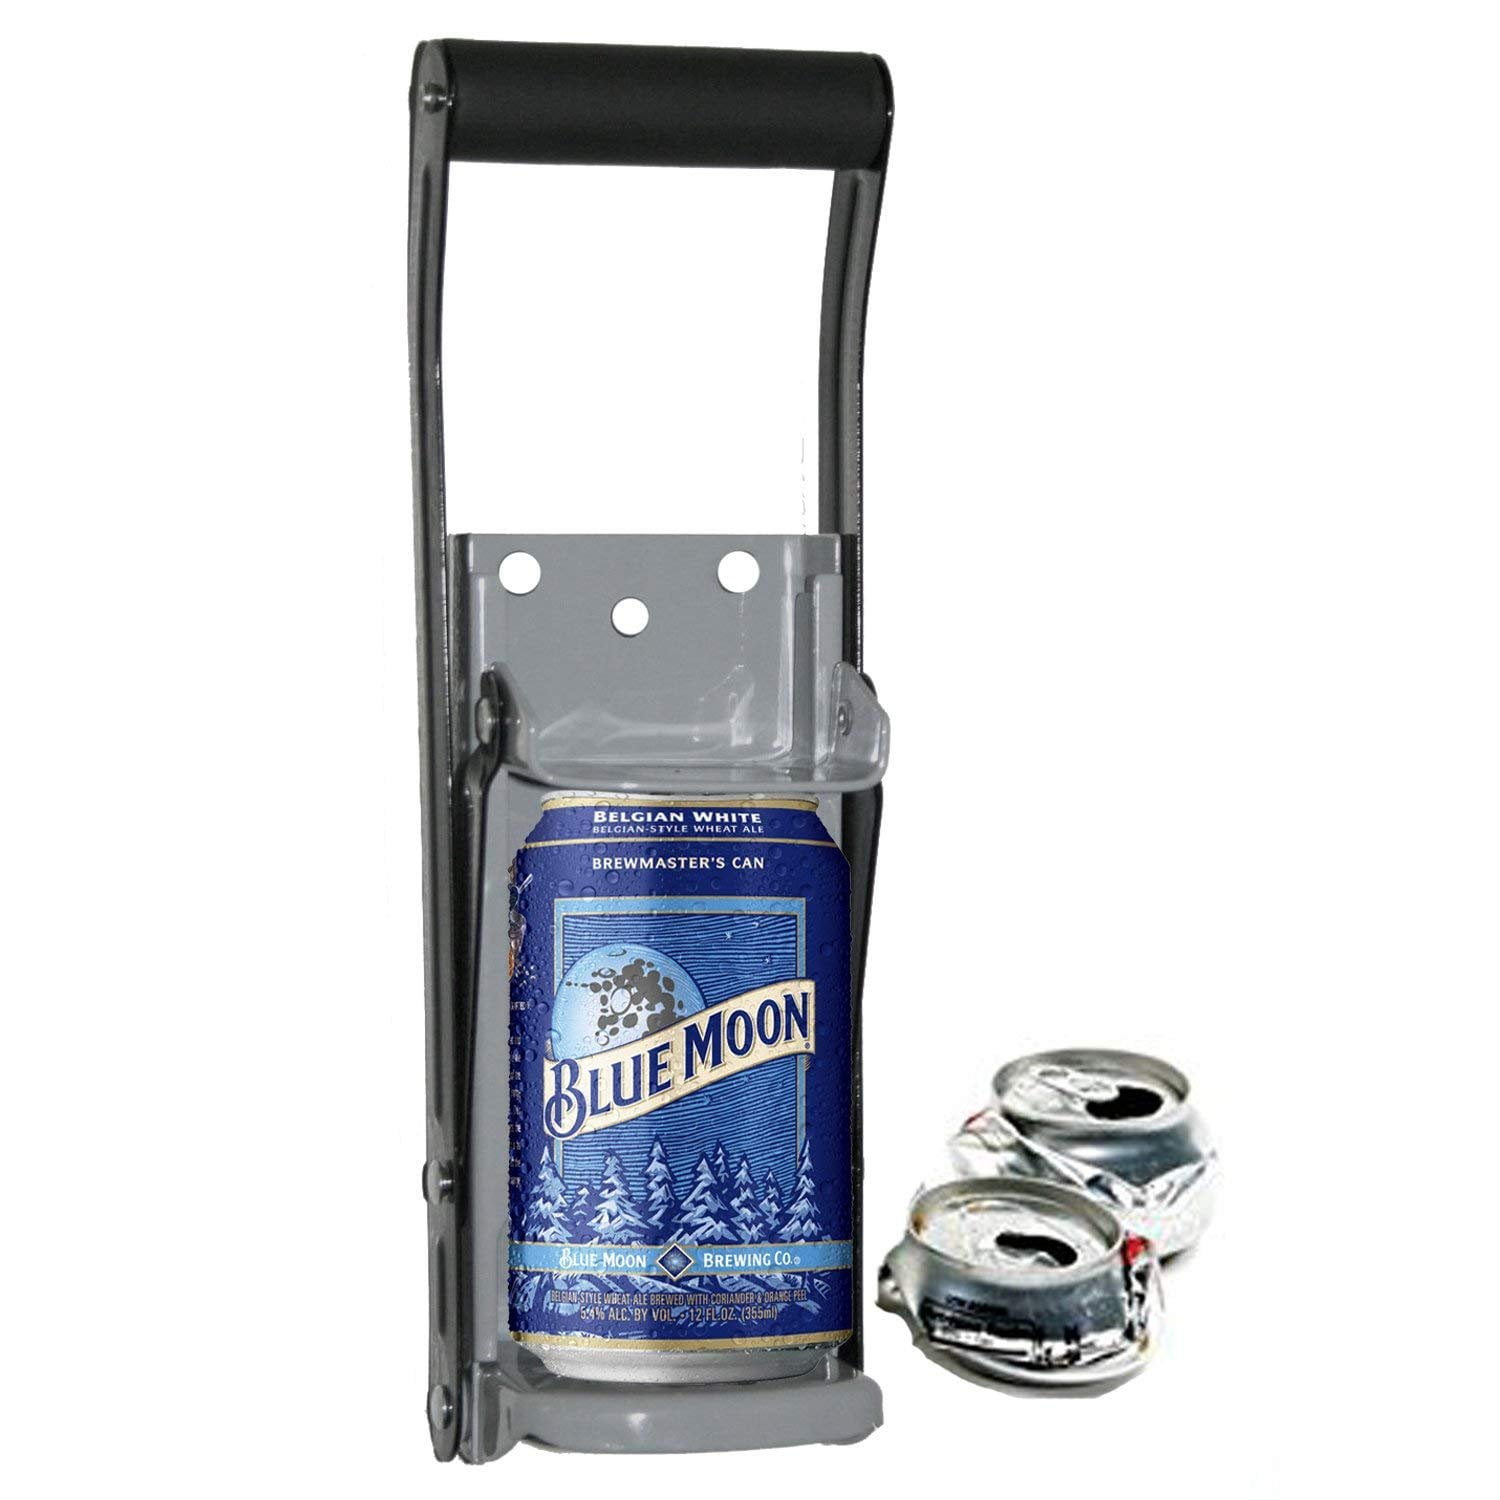 Pop Can Handle, Personalized 12 Oz Beer Can Holder, Heavy Duty